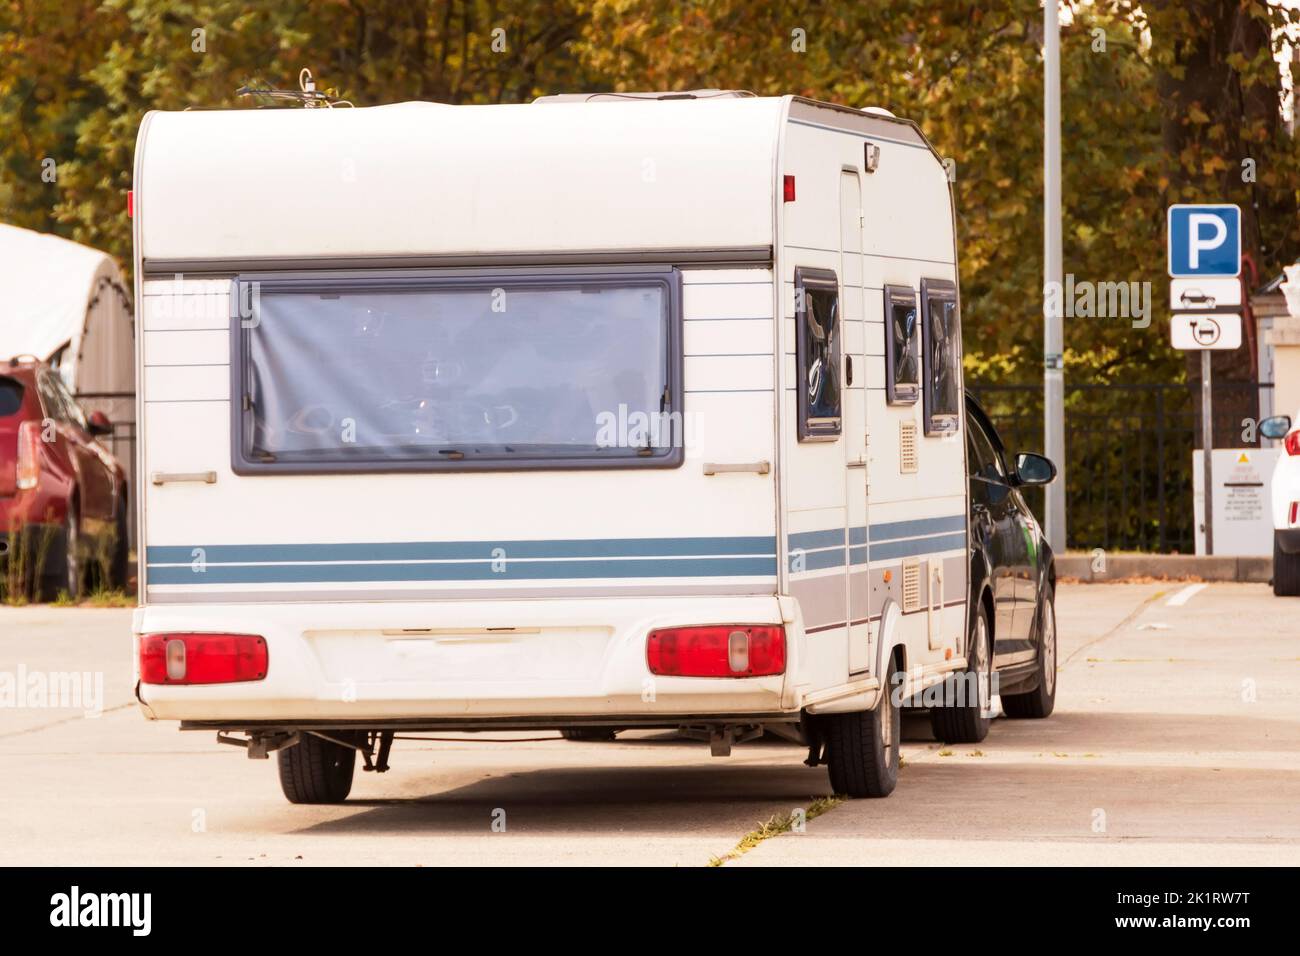 Motor home attached to a car, parking lot Stock Photo